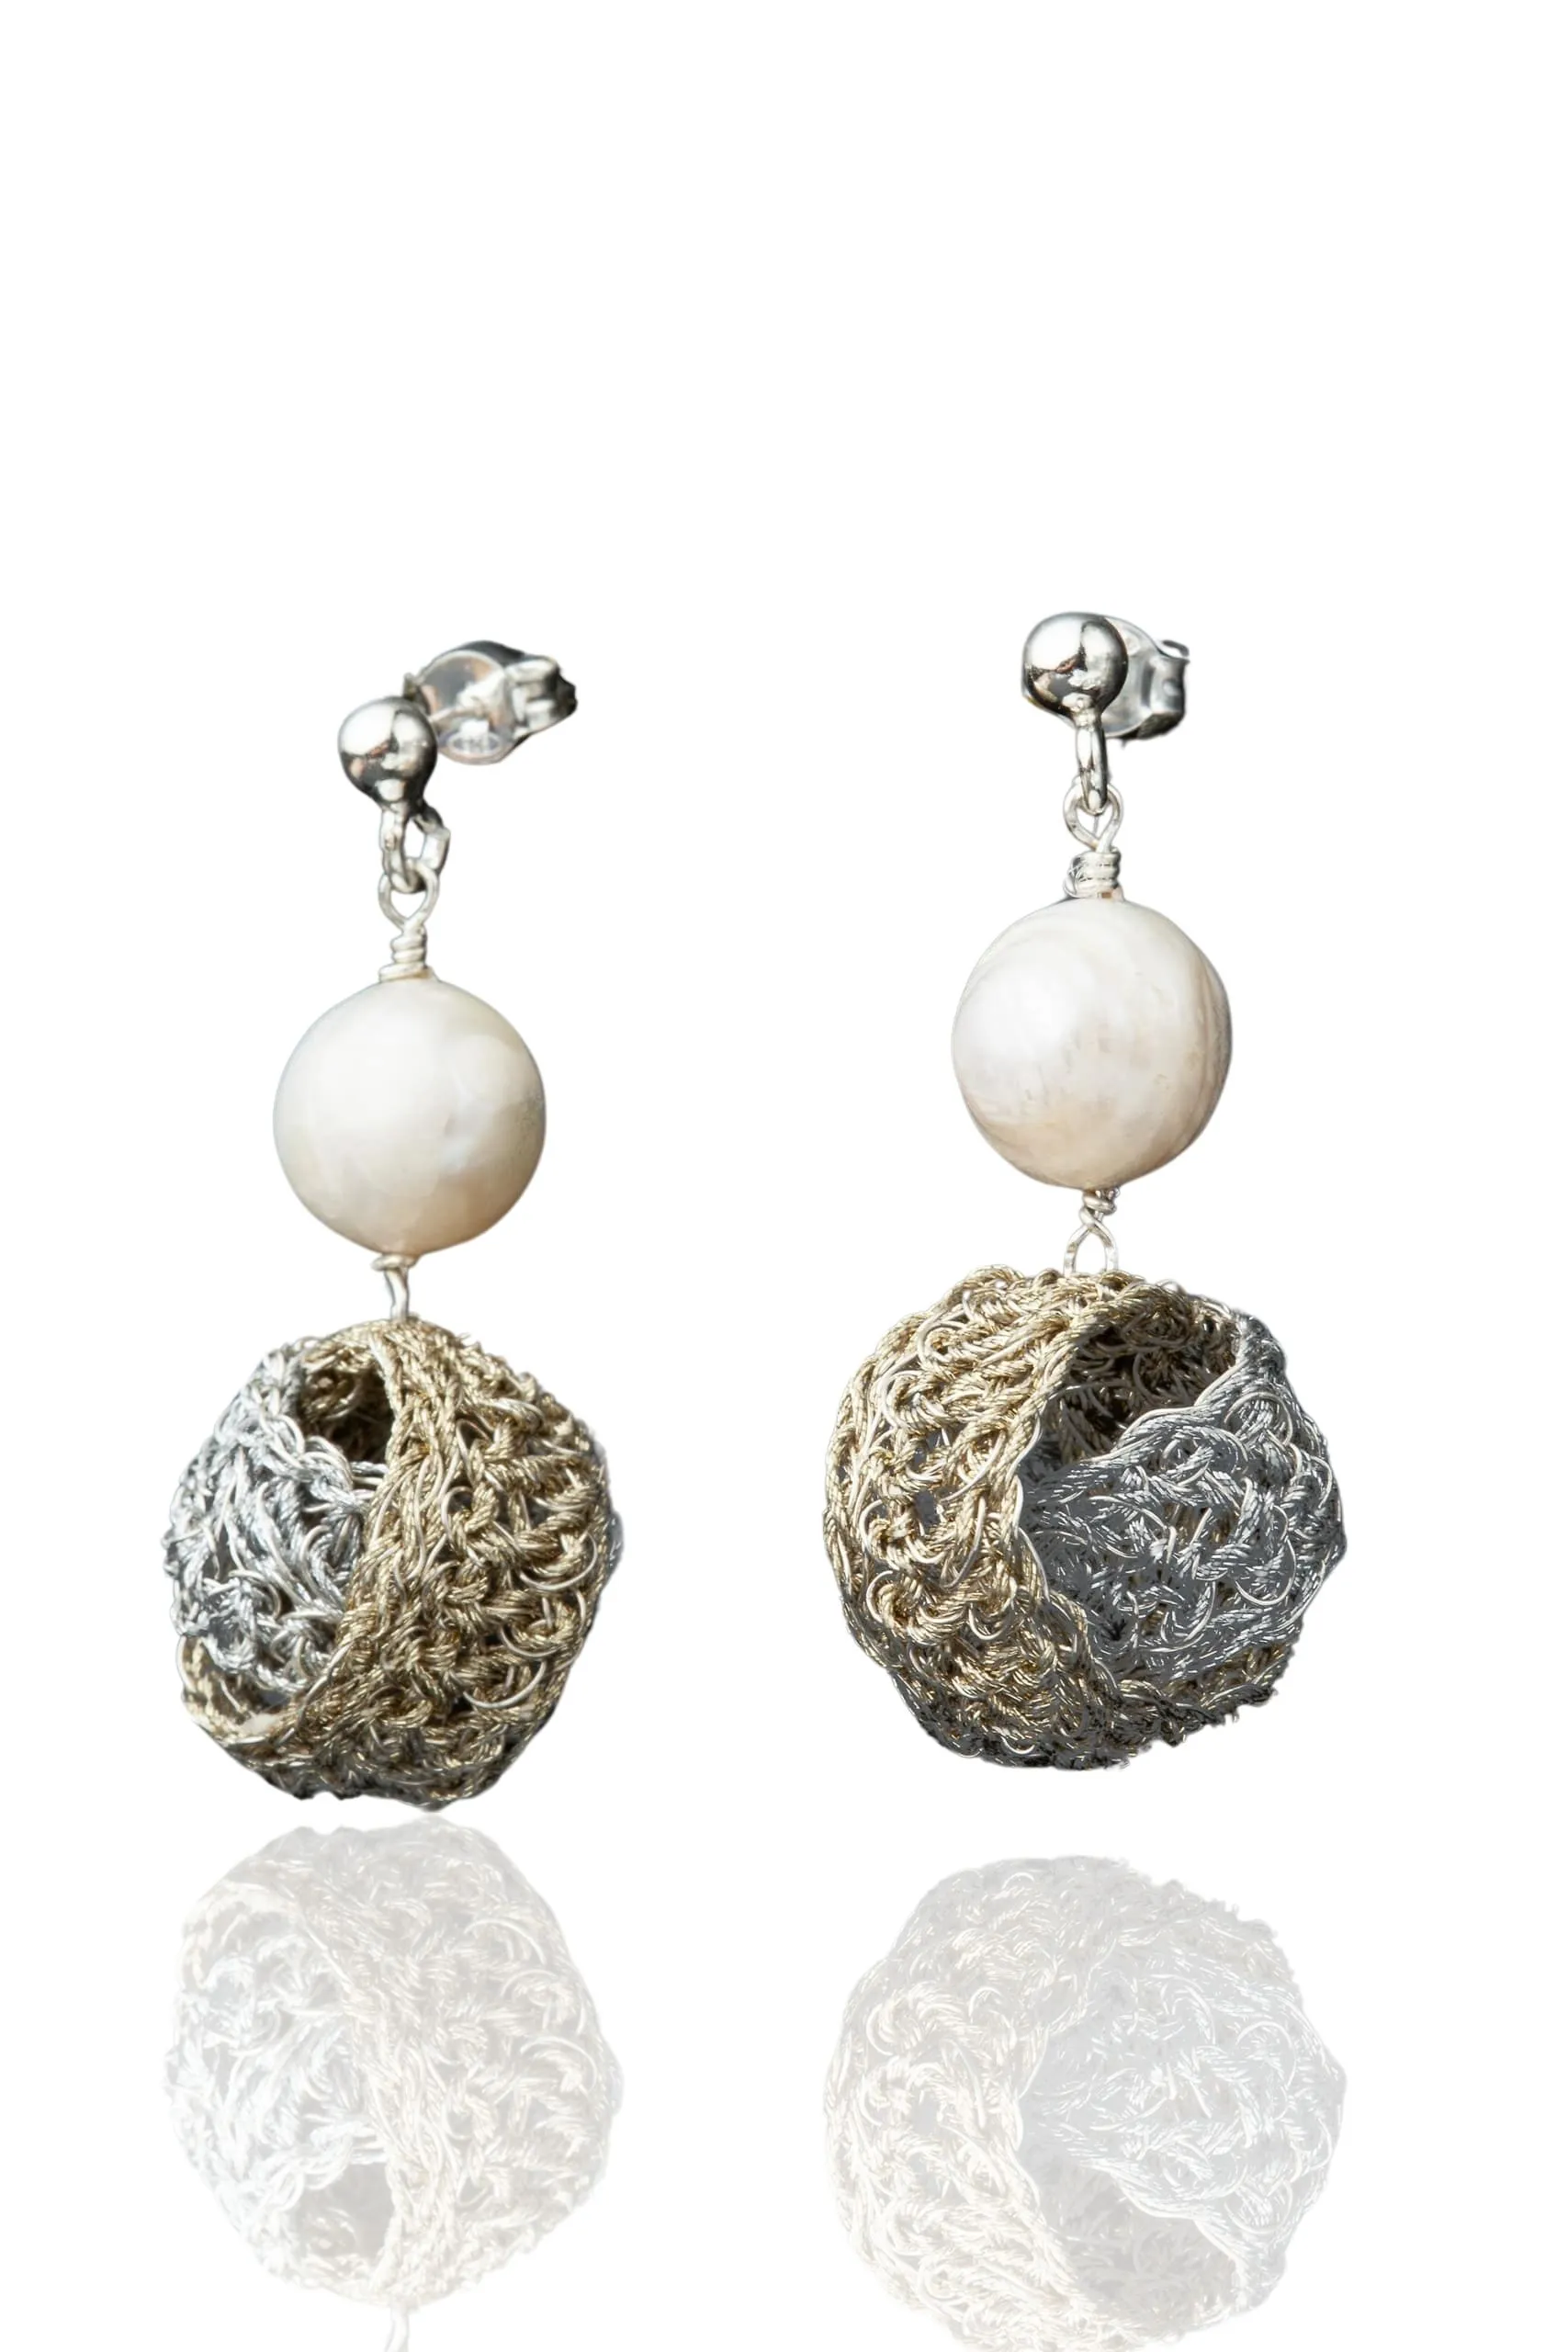 Handmade Jewellery | Crochet knit silver earrings with and pearls main